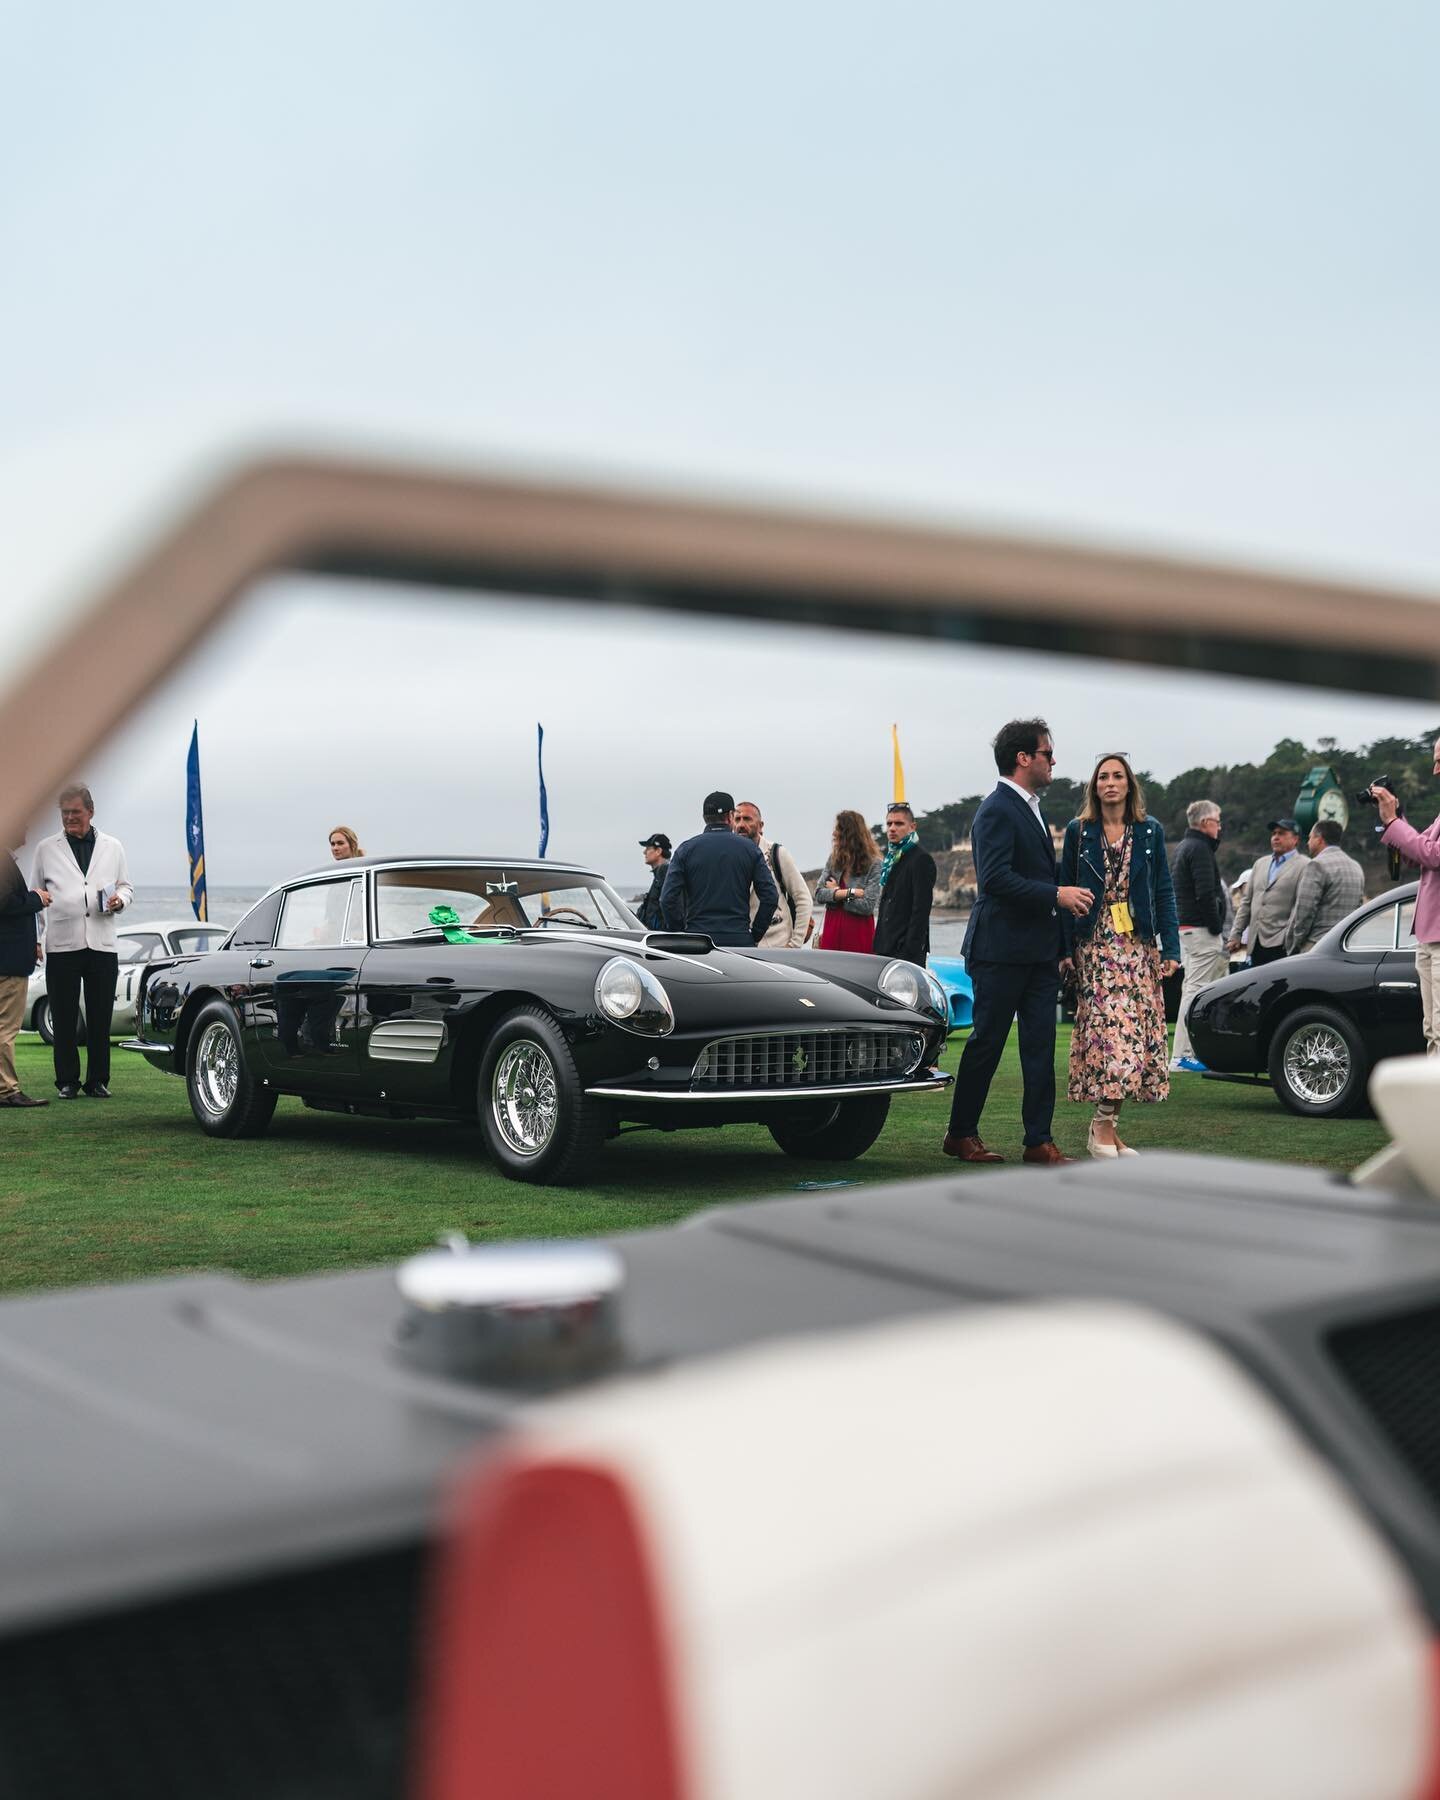 It was great seeing our friends @cfcogan and @grandtouringenterprises today at the @pebblebeachconcours and the beautiful results of all their hard work restoring the Ferrari 410 Superamerica and 7.0L Iso Grifo.

#pebblebeachconcours #ferrariclassic 